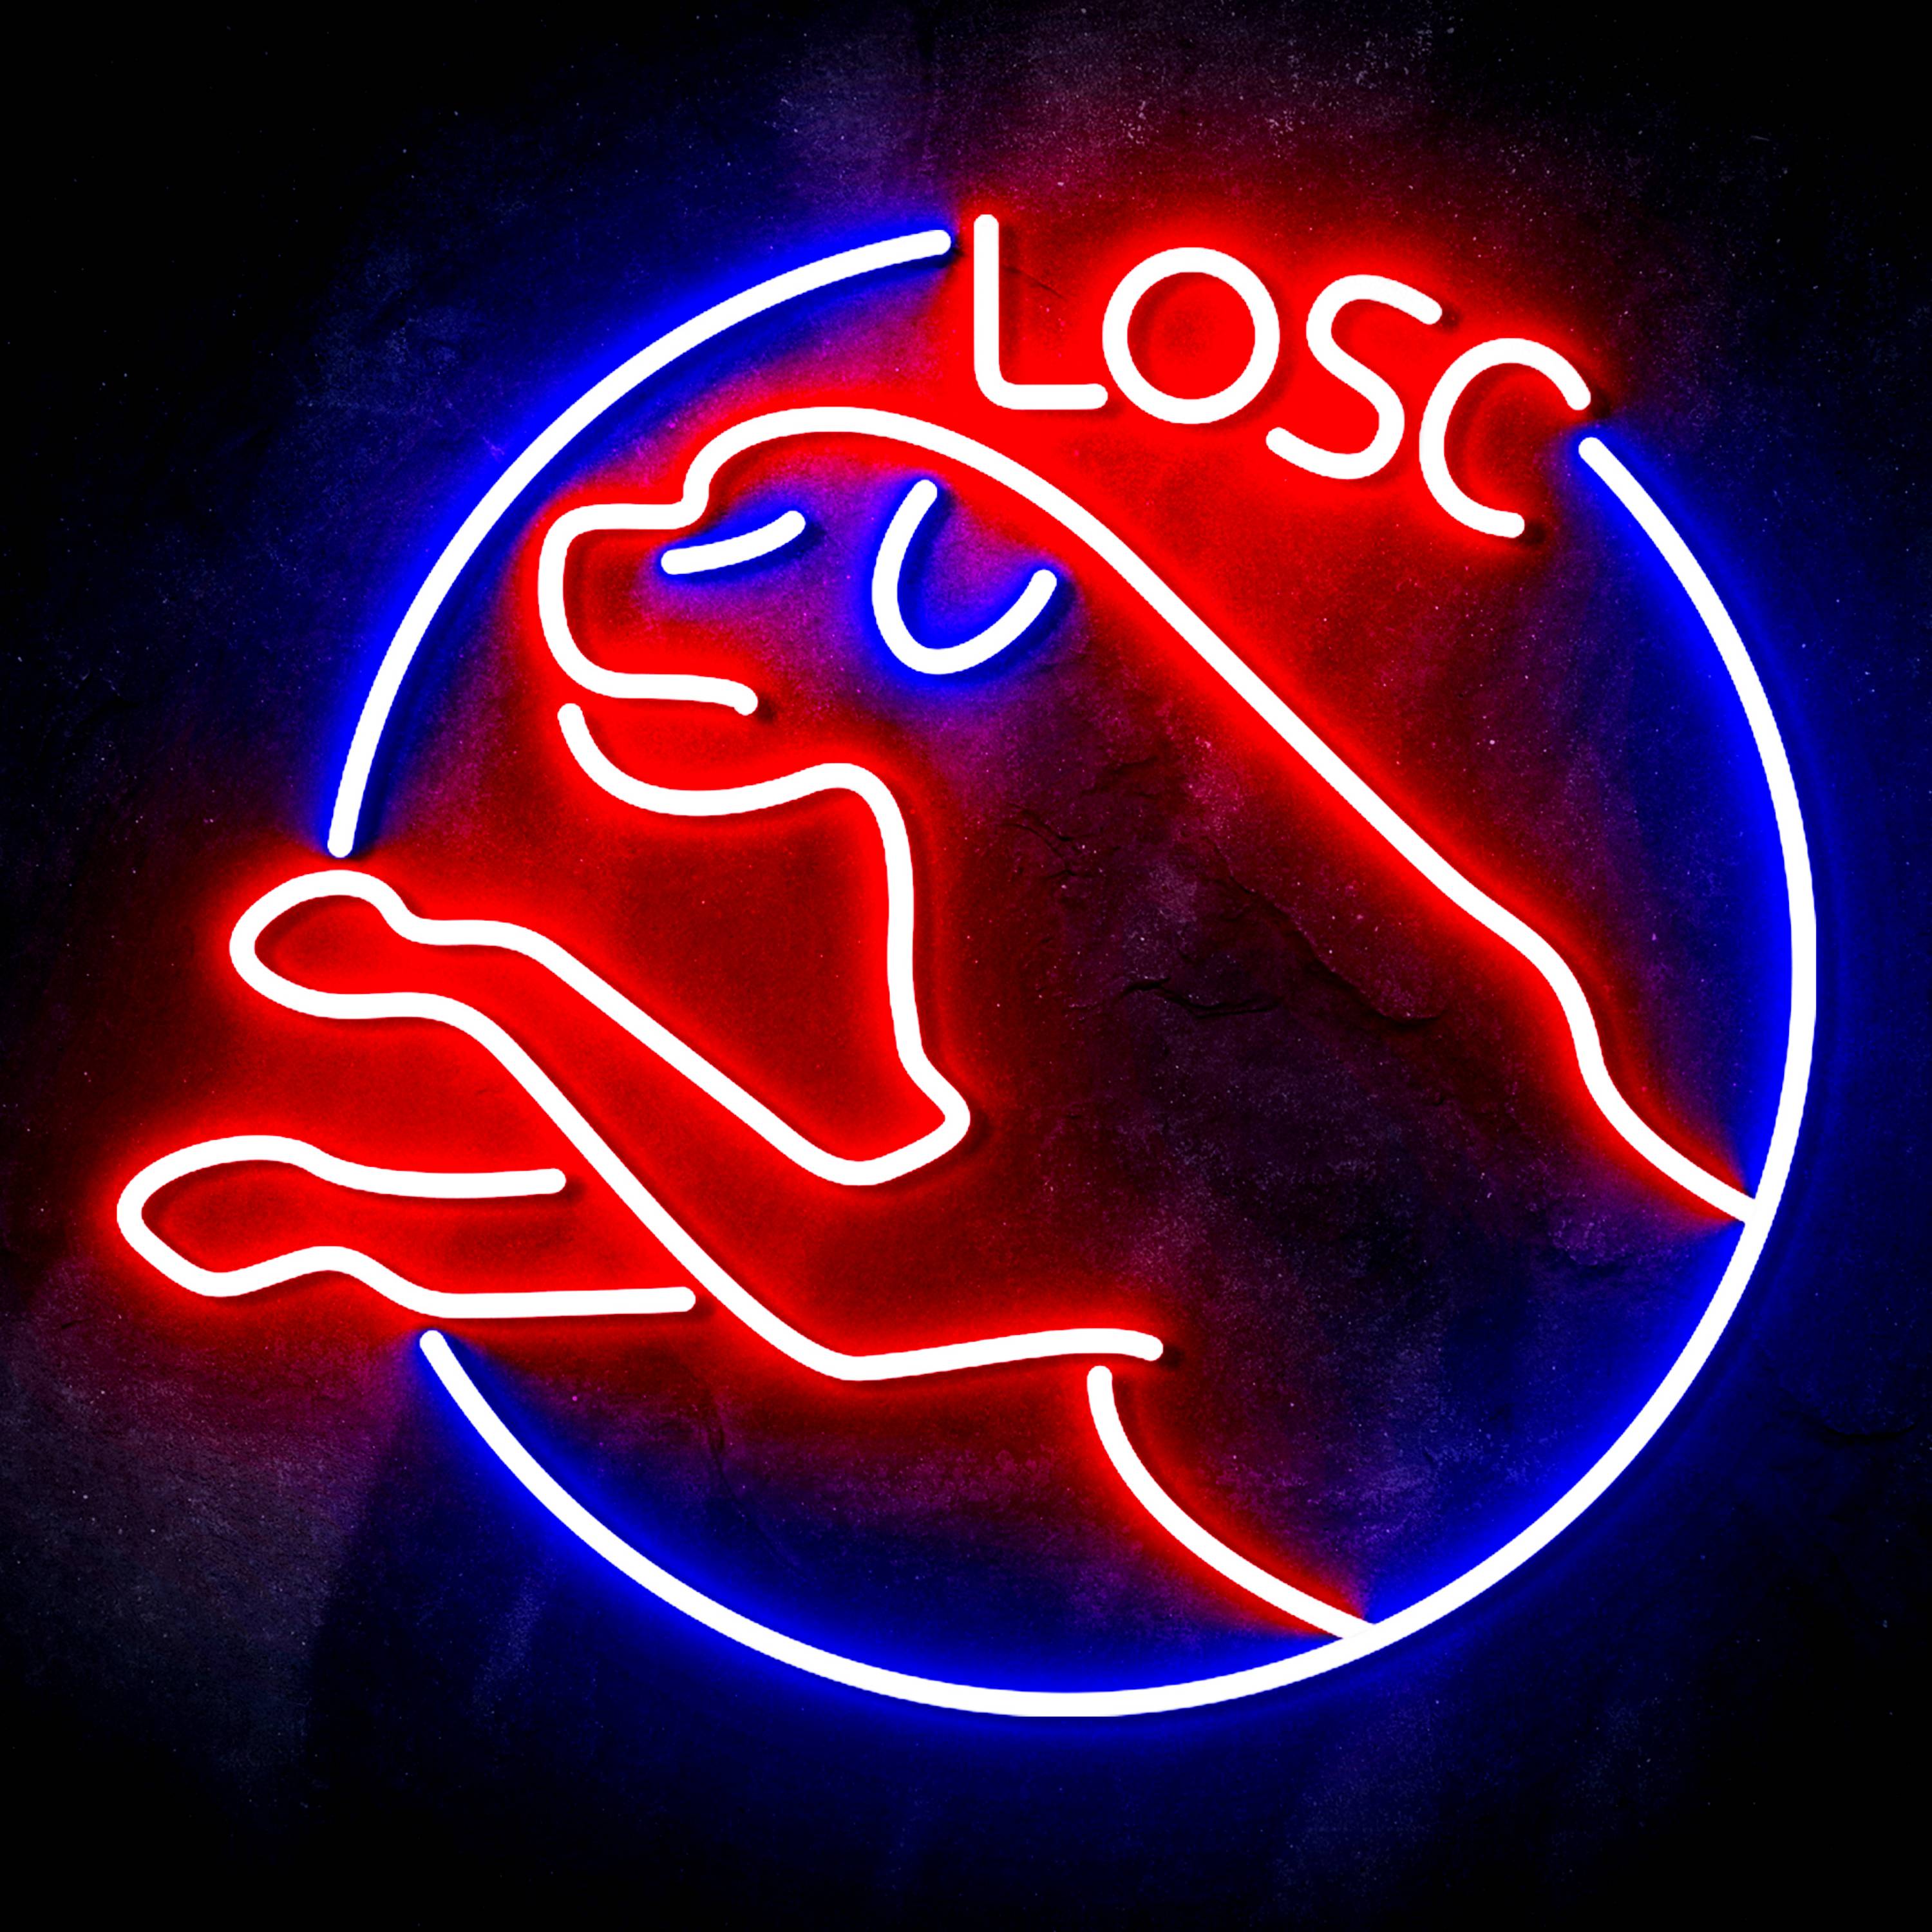 Ligue Lille Olympique Sporting Club Lille M茅tropole Neon-like Sign Sport Bar Decor